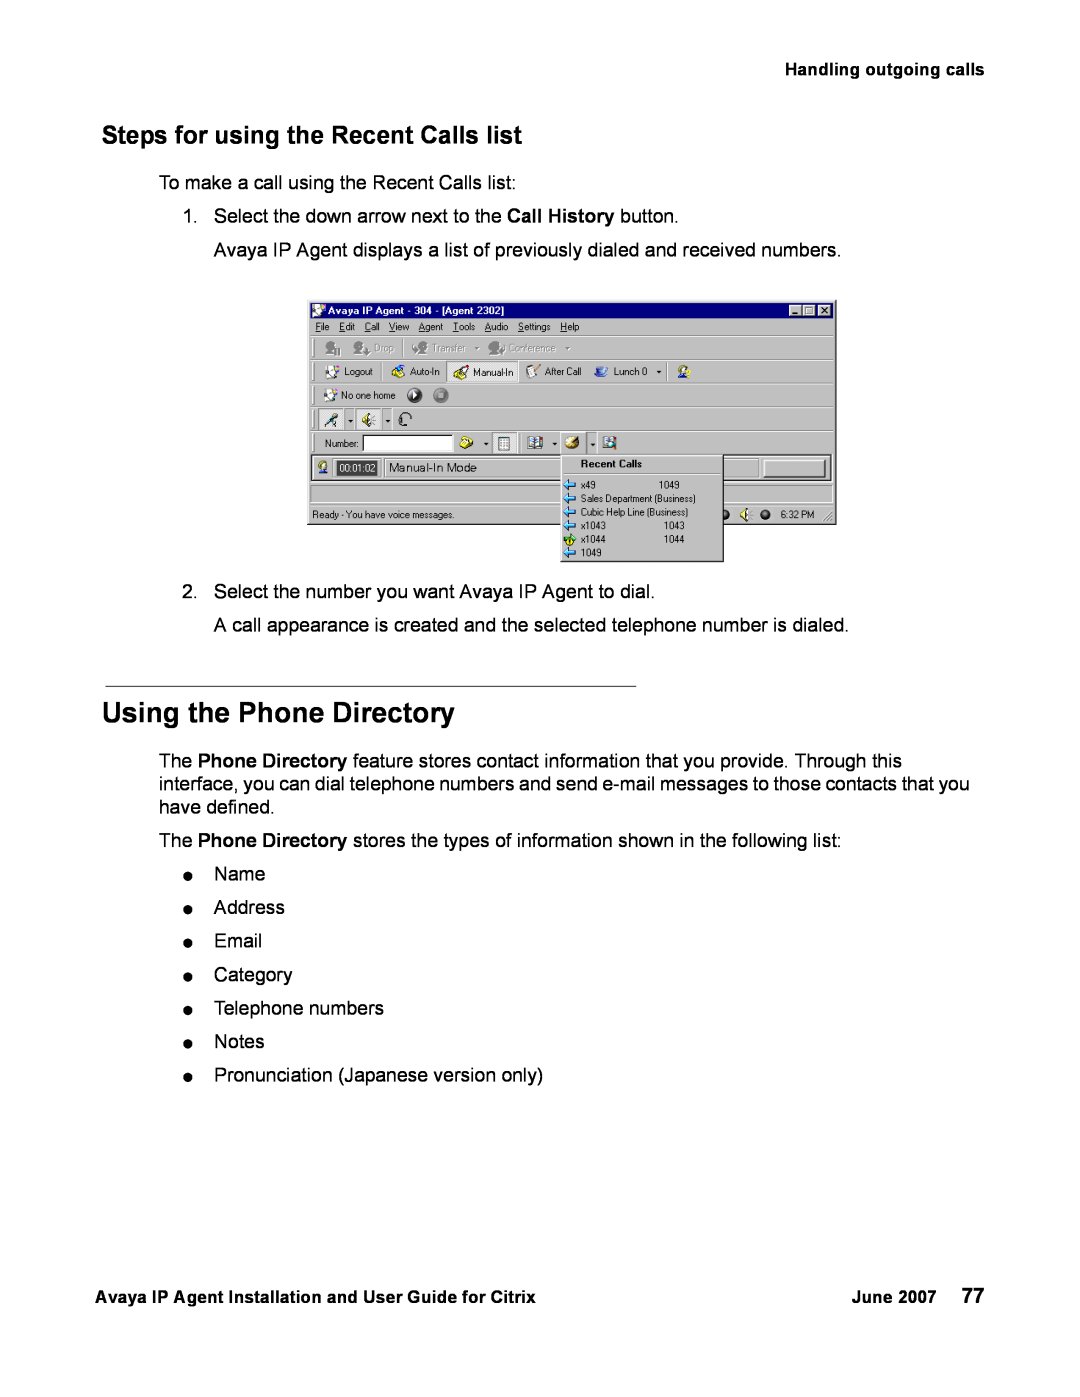 Avaya 7 manual Using the Phone Directory, Steps for using the Recent Calls list 